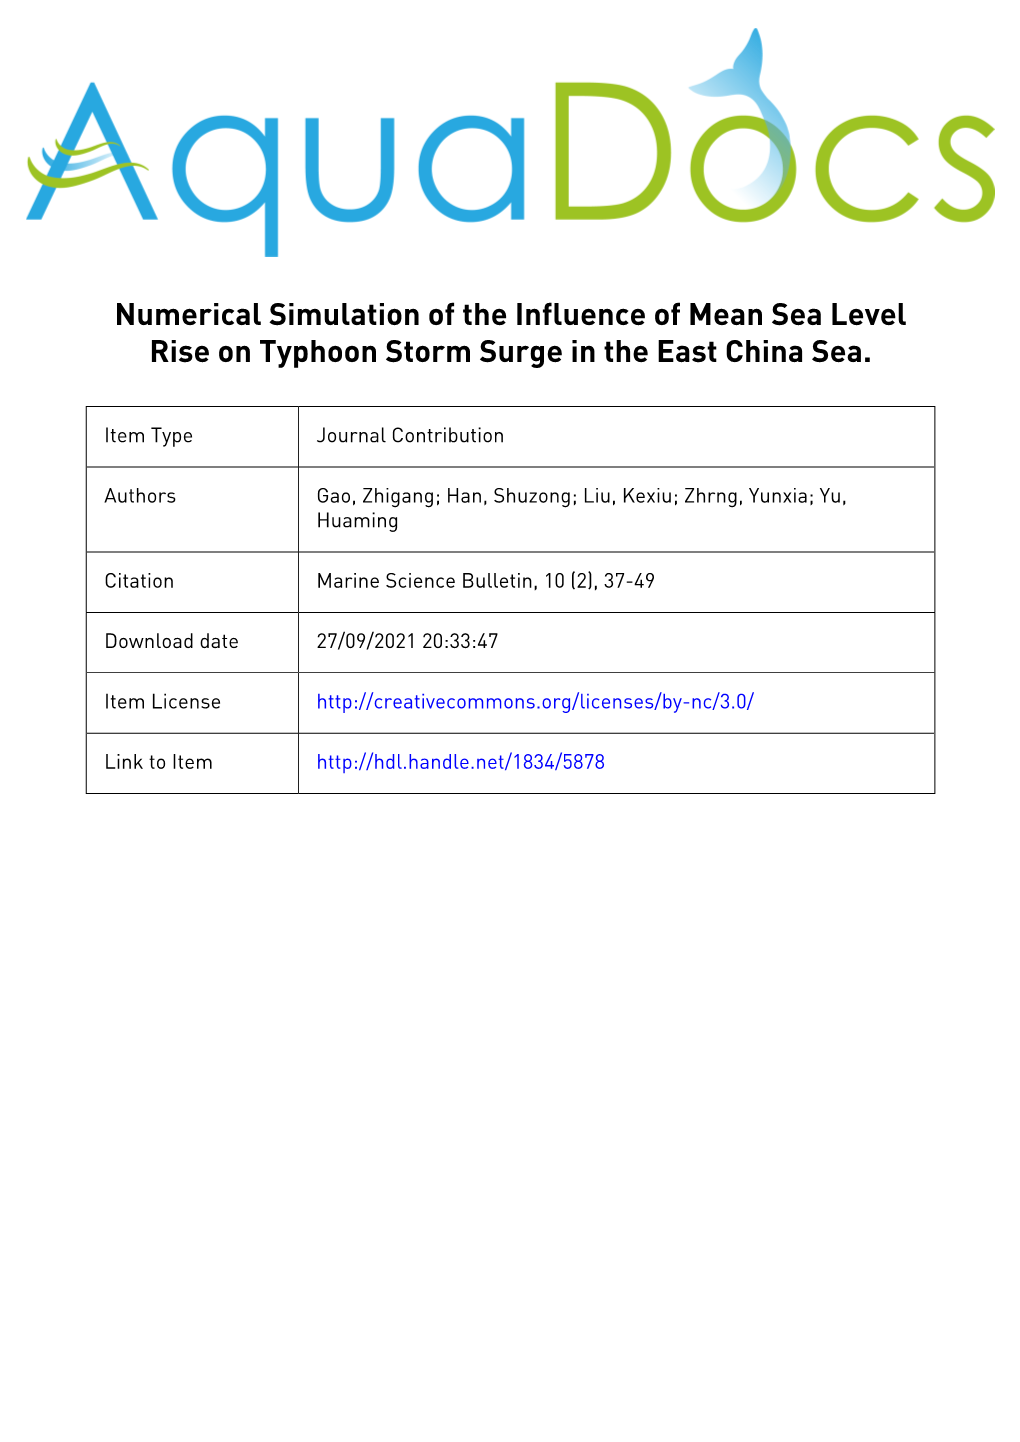 Numerical Simulation of the Influence of Mean Sea Level Rise on Typhoon Storm Surge in the East China Sea